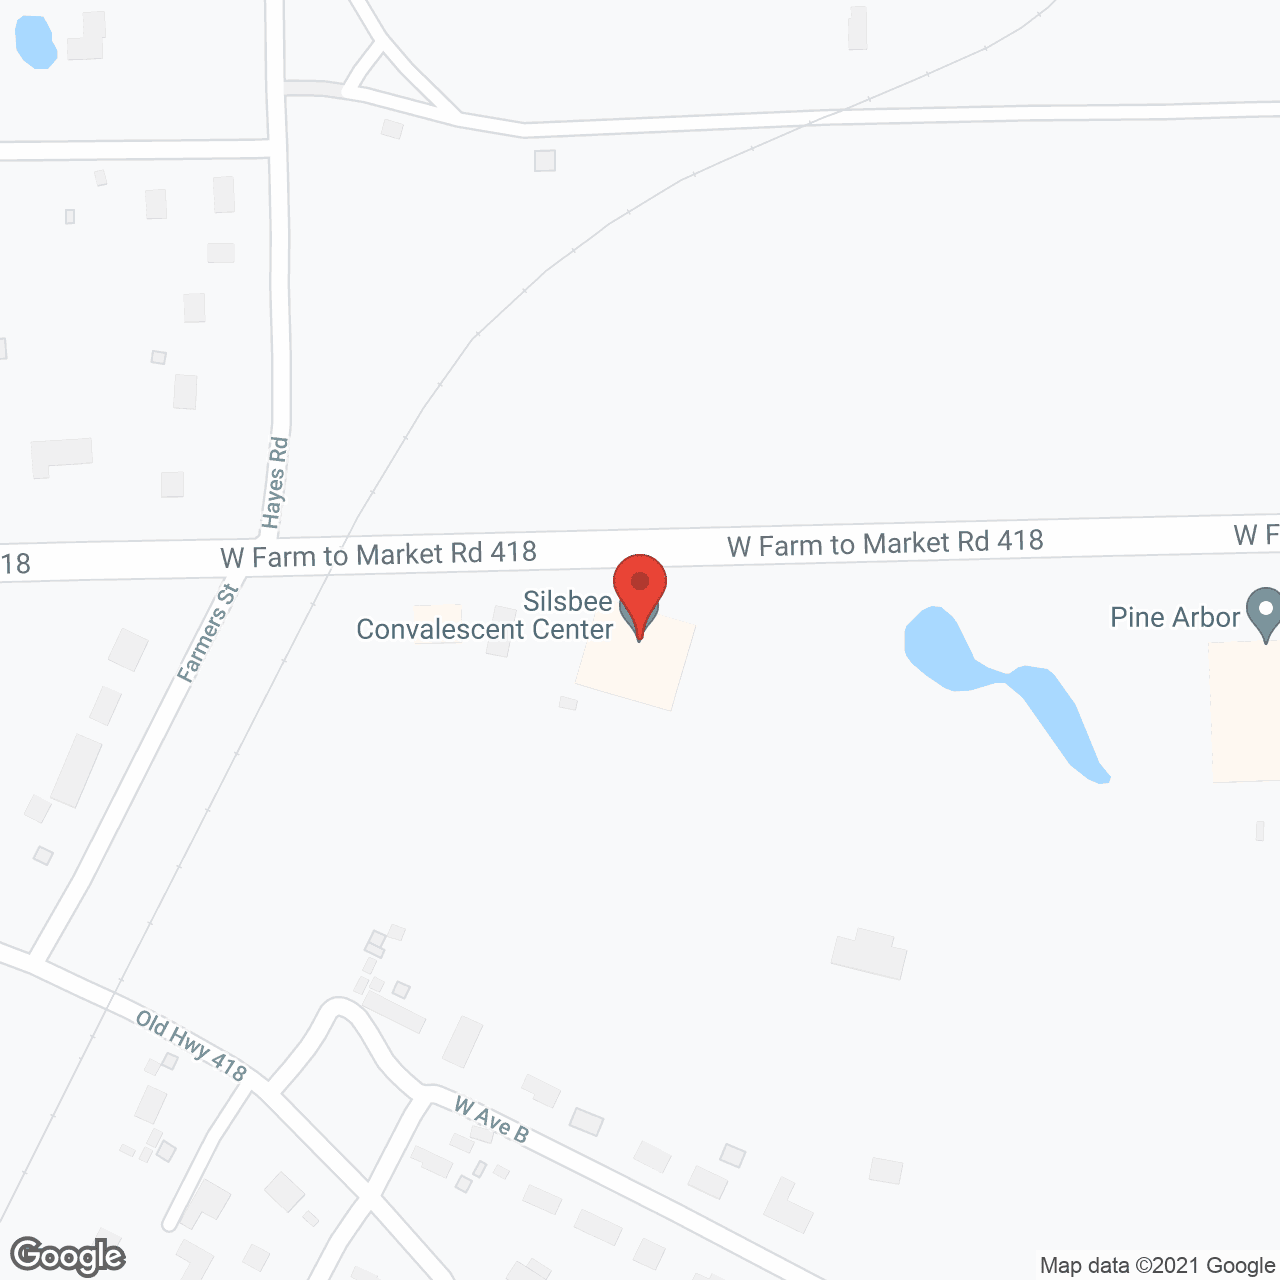 Silsbee Convalescent Center in google map